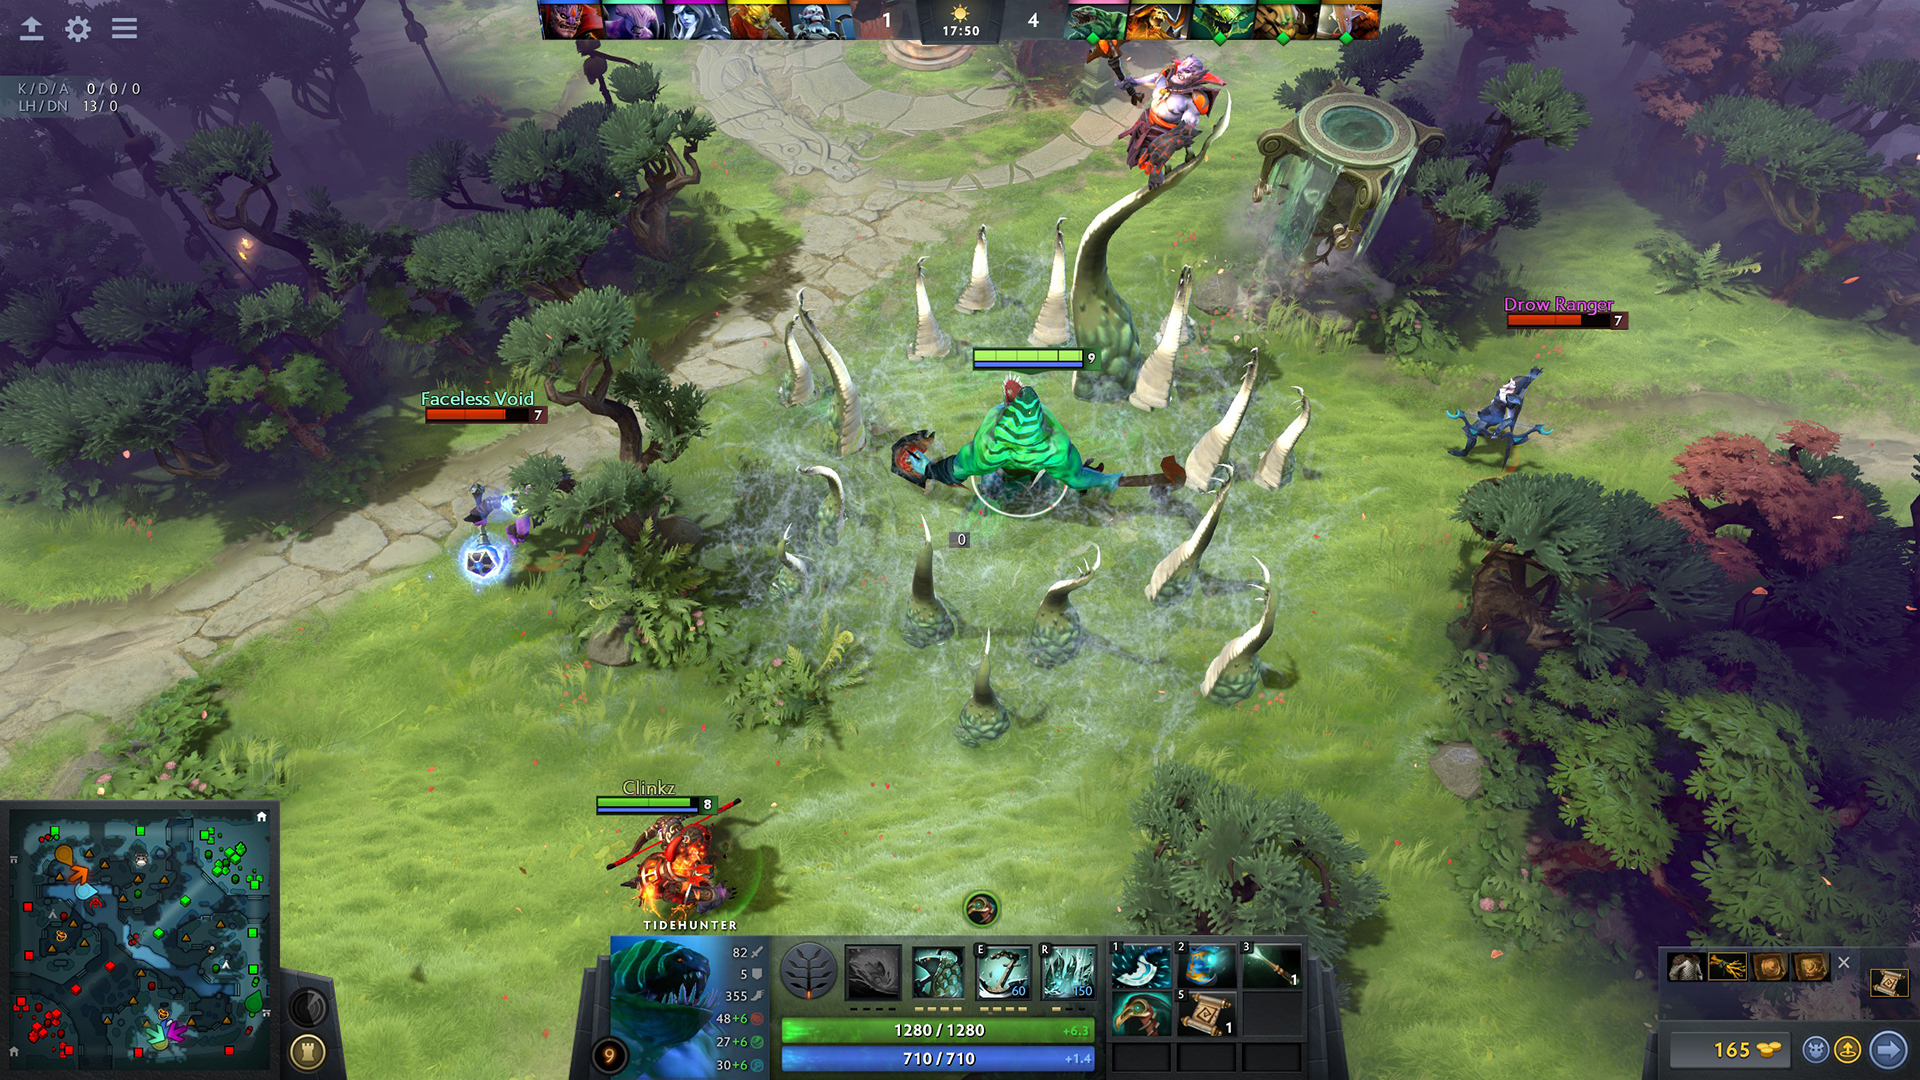 a dota 2 shot showing a tentacle creature fighting off three heroes